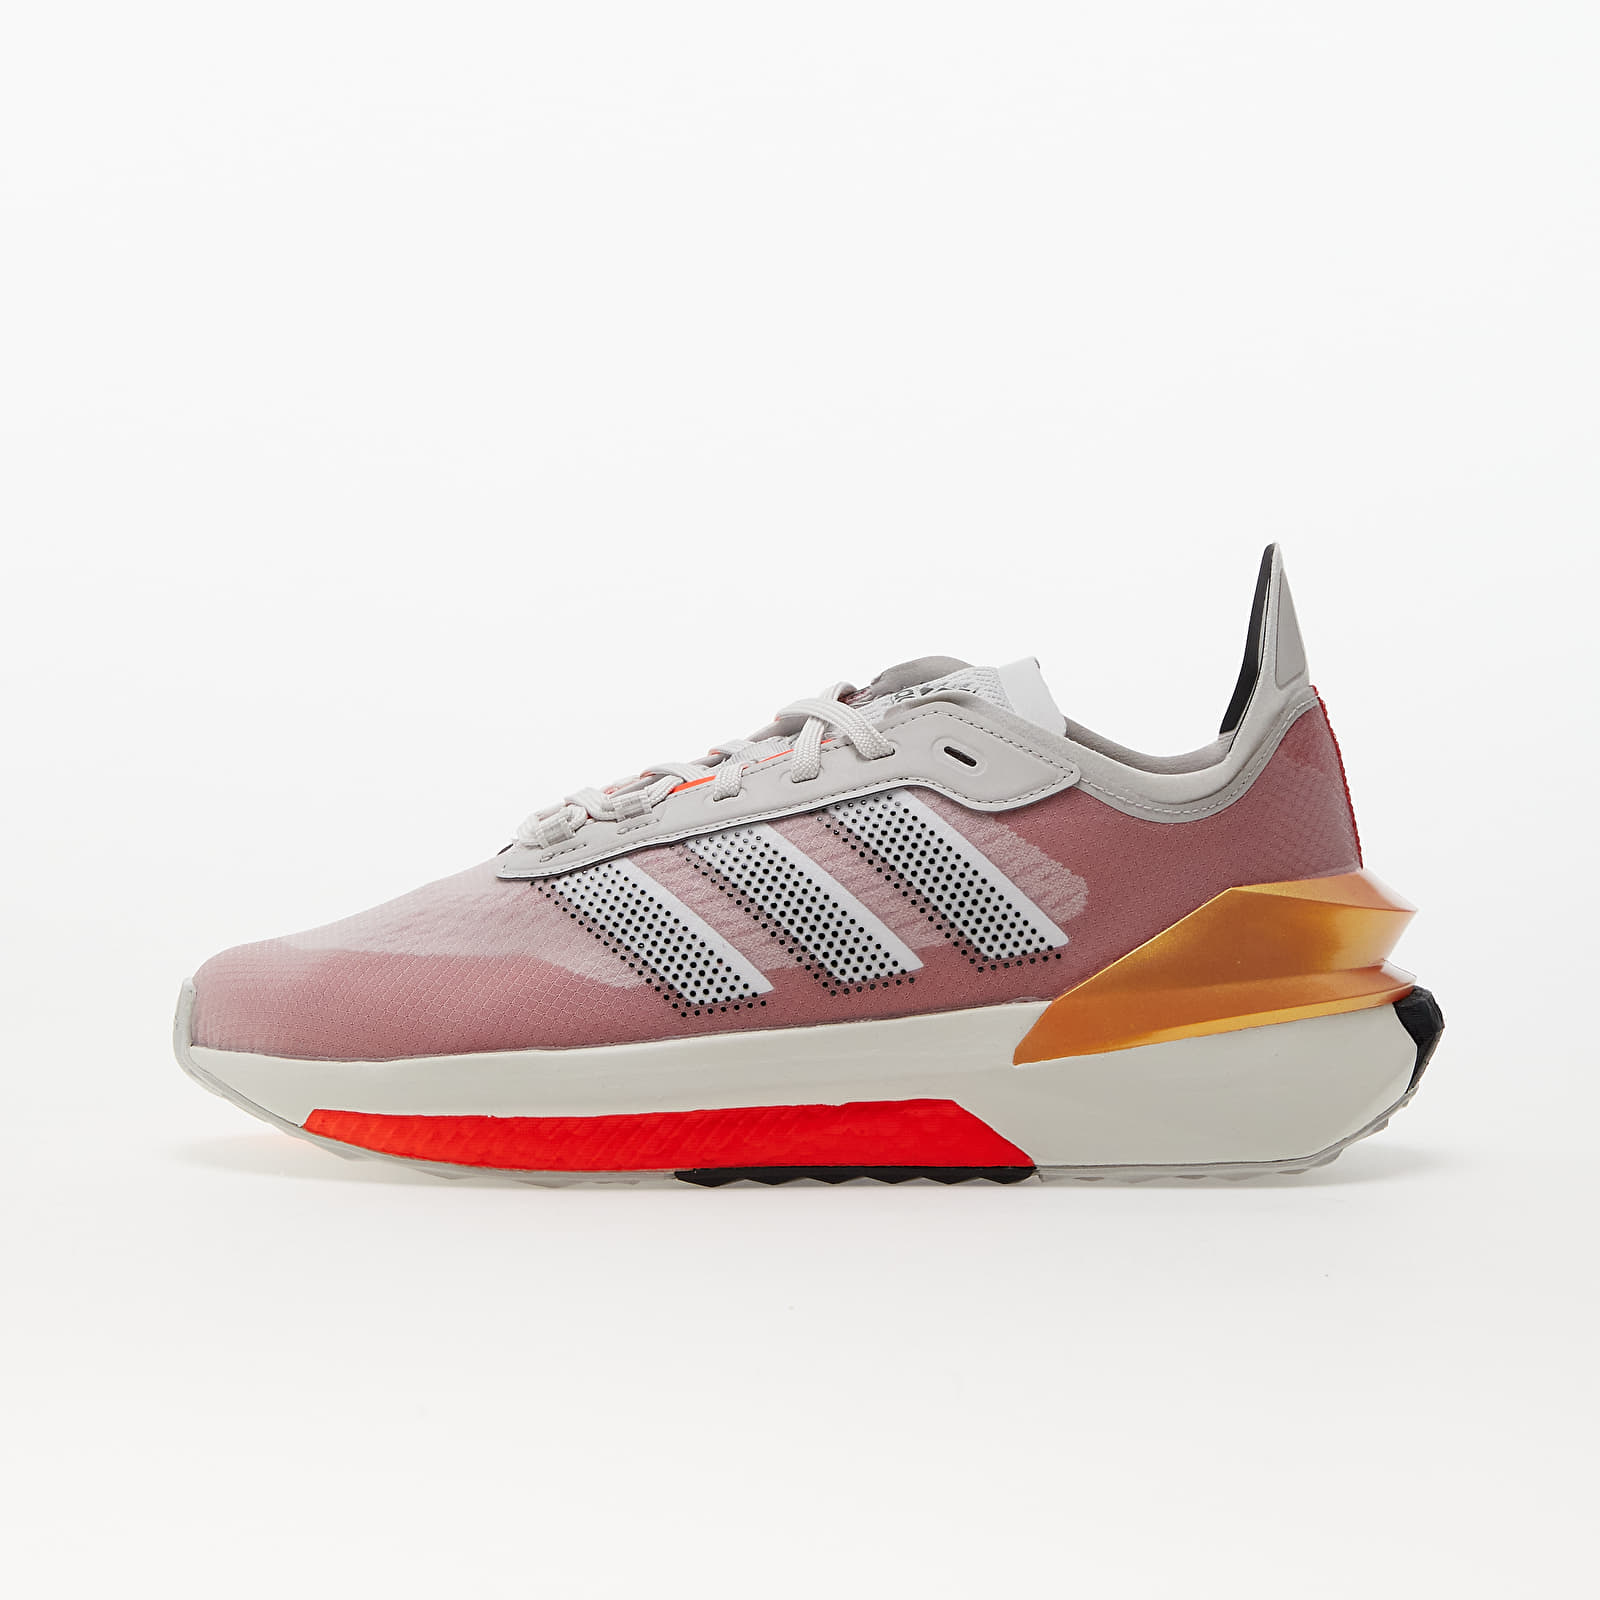 Men's shoes adidas Performance Avryn Grey One/ Ftw White/ Solid Red